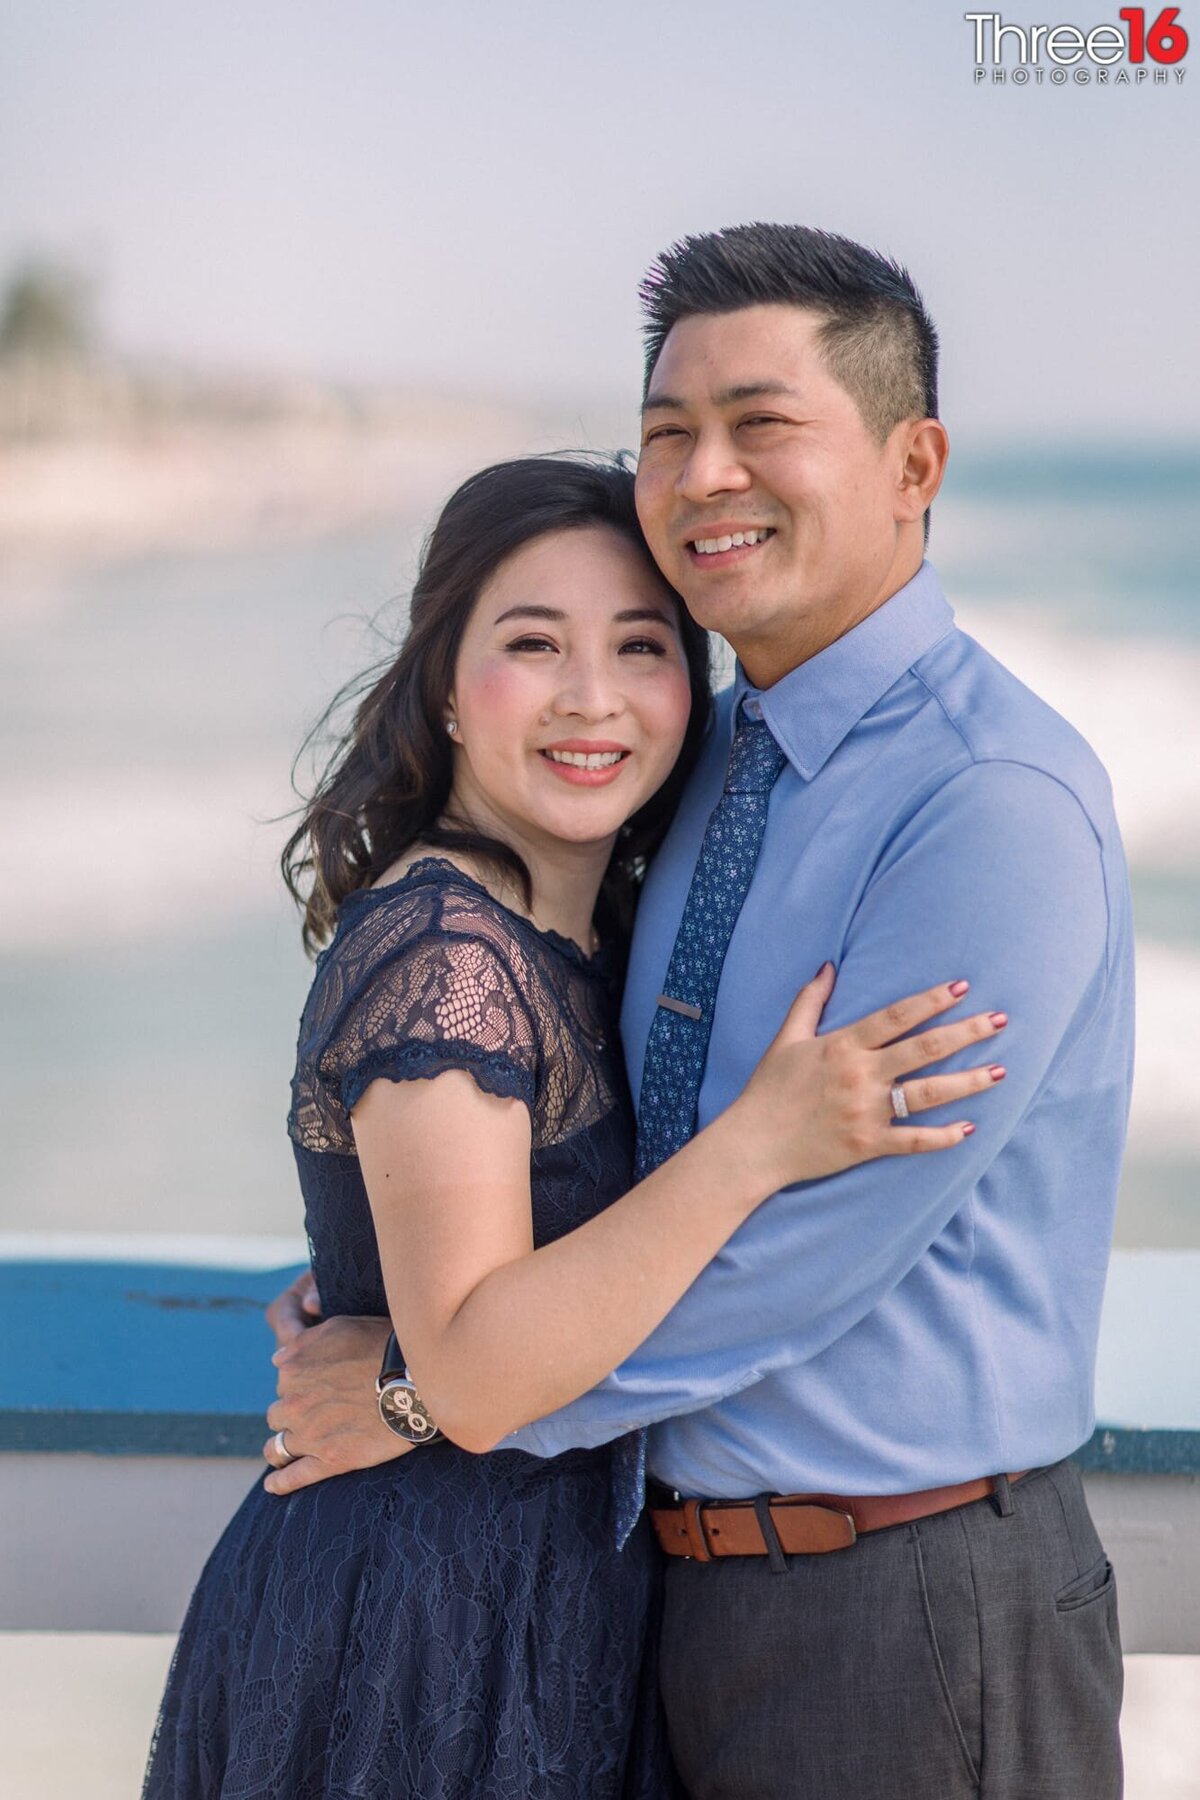 Engaged couple embrace each other during photo shoot